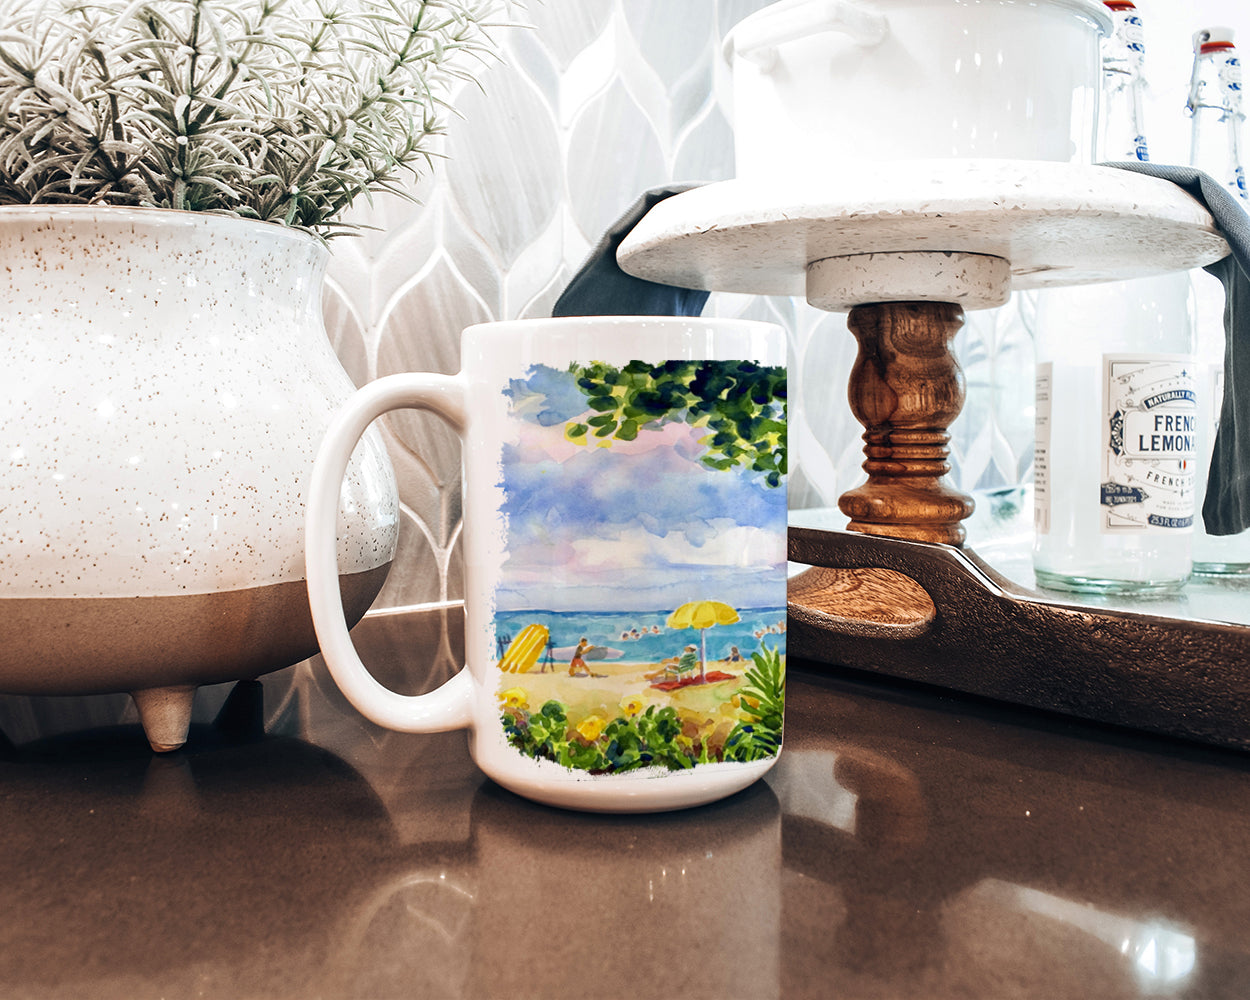 Beach Resort view from the condo Dishwasher Safe Microwavable Ceramic Coffee Mug 15 ounce 6065CM15